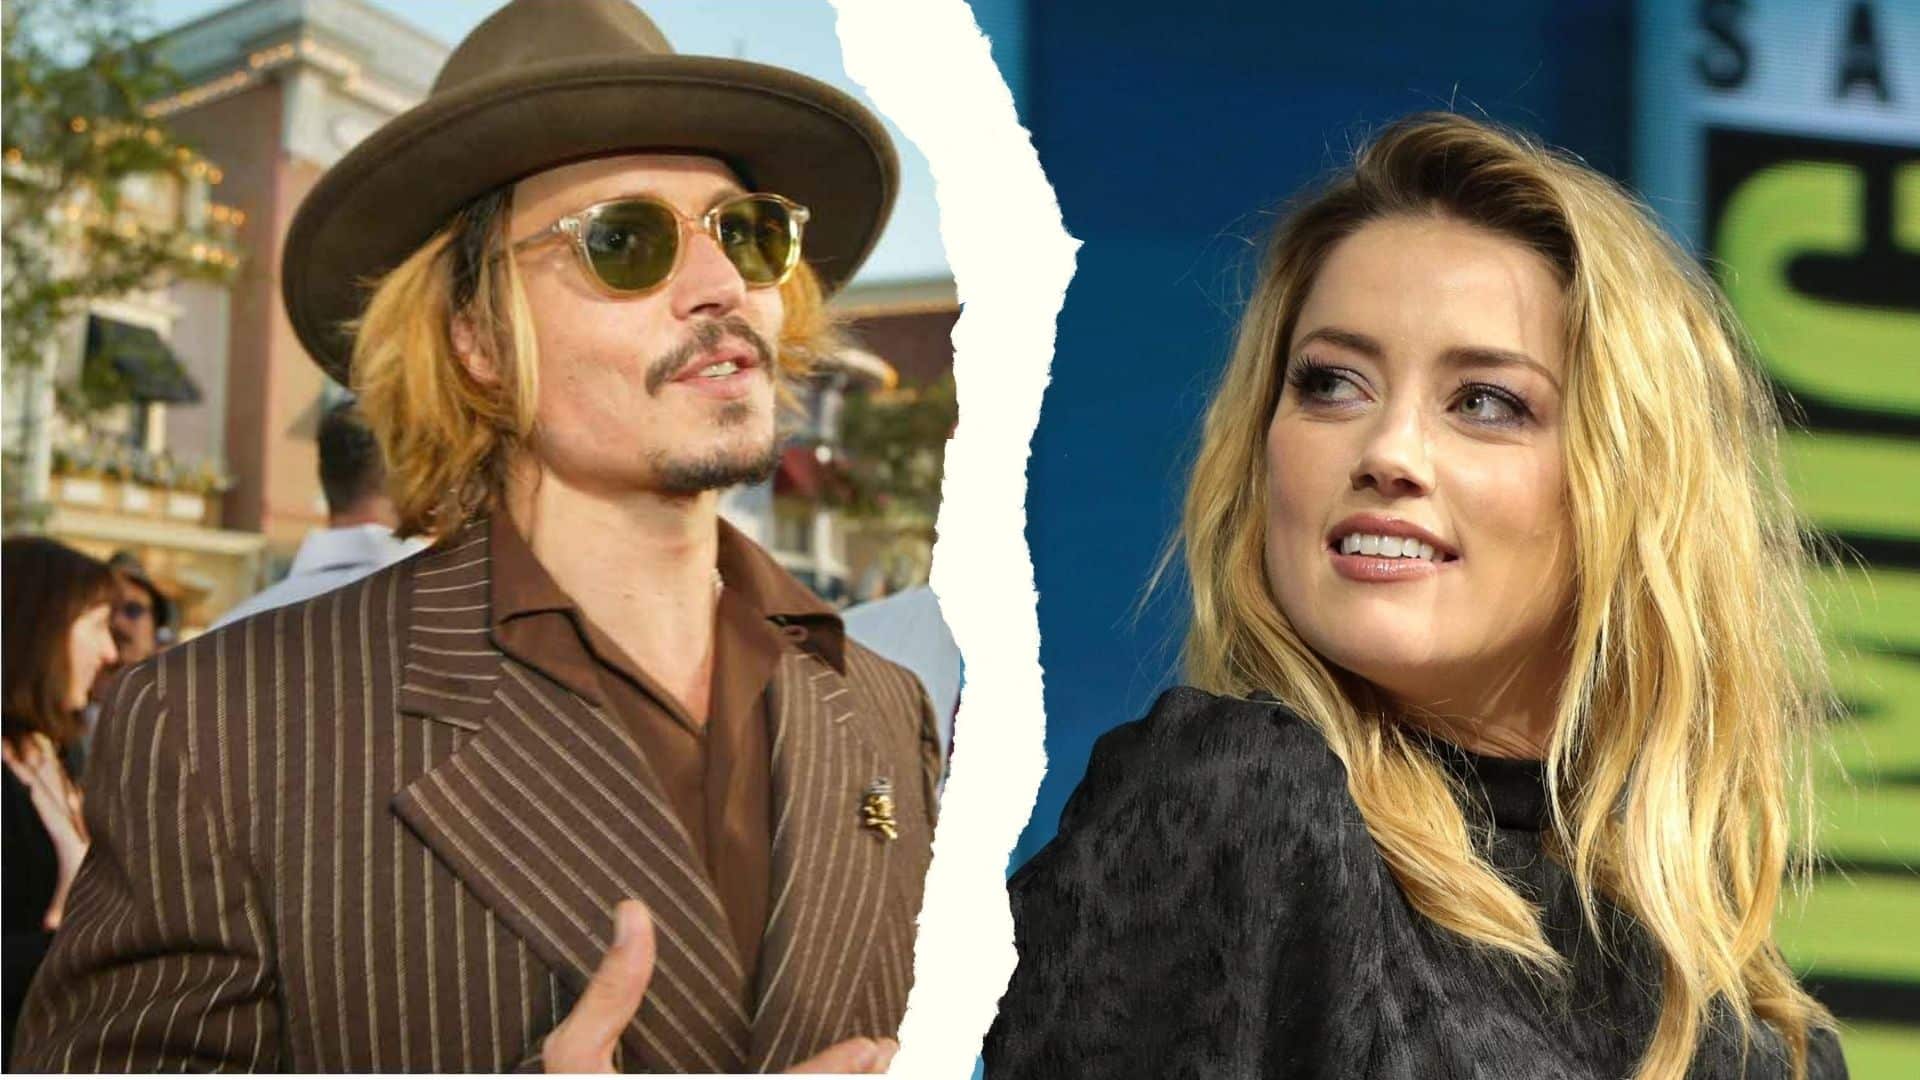 Cover photo of Johnny Depp and Amber Heard defamation law case